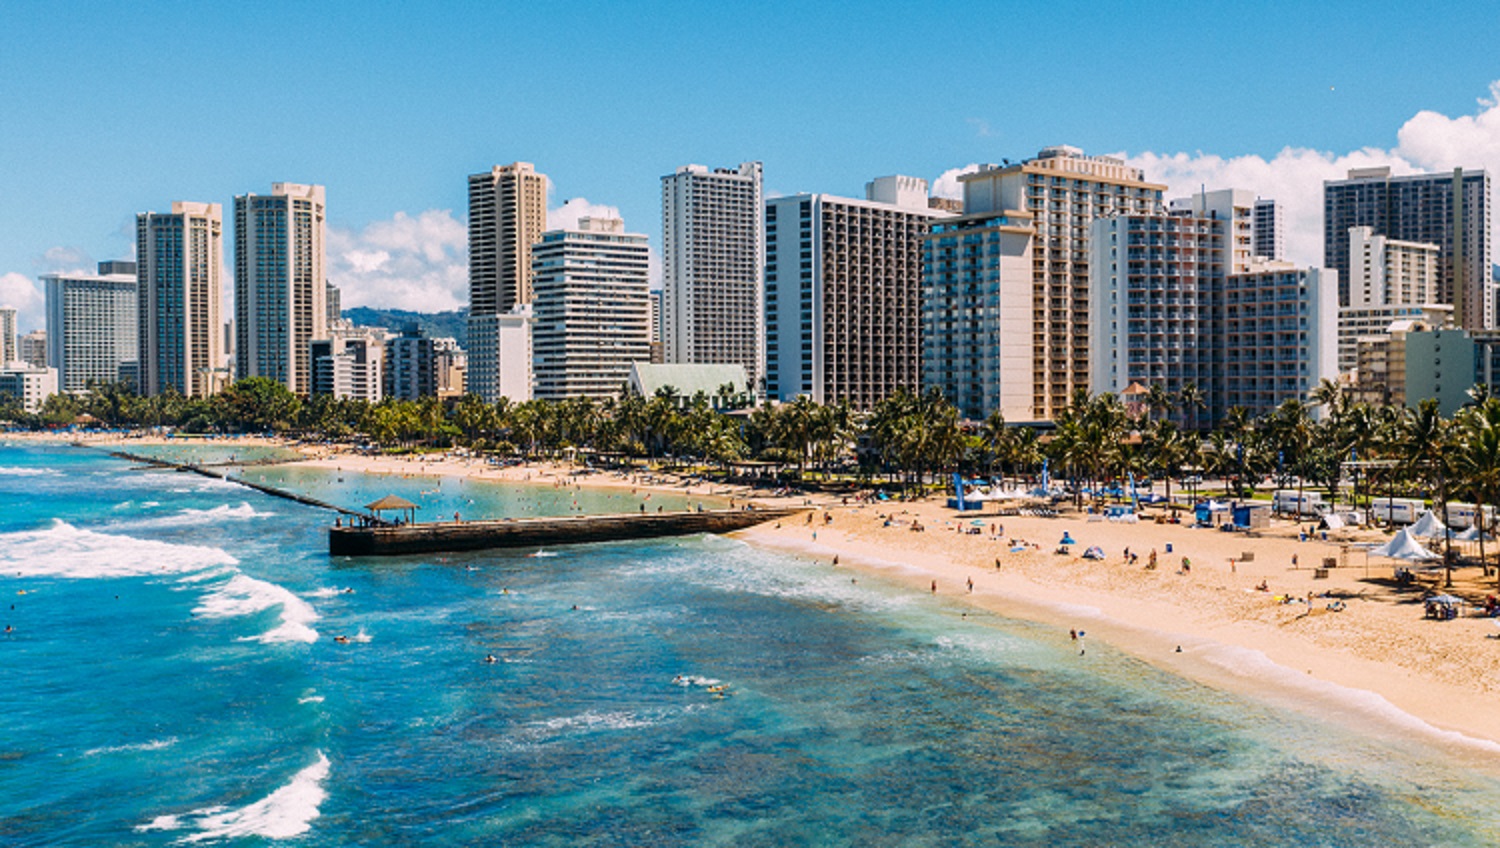 Photograph of Waikiki from Queens Beach. Photo courtesy of Hawaii Tourism Authority, Vincent Lim photographer